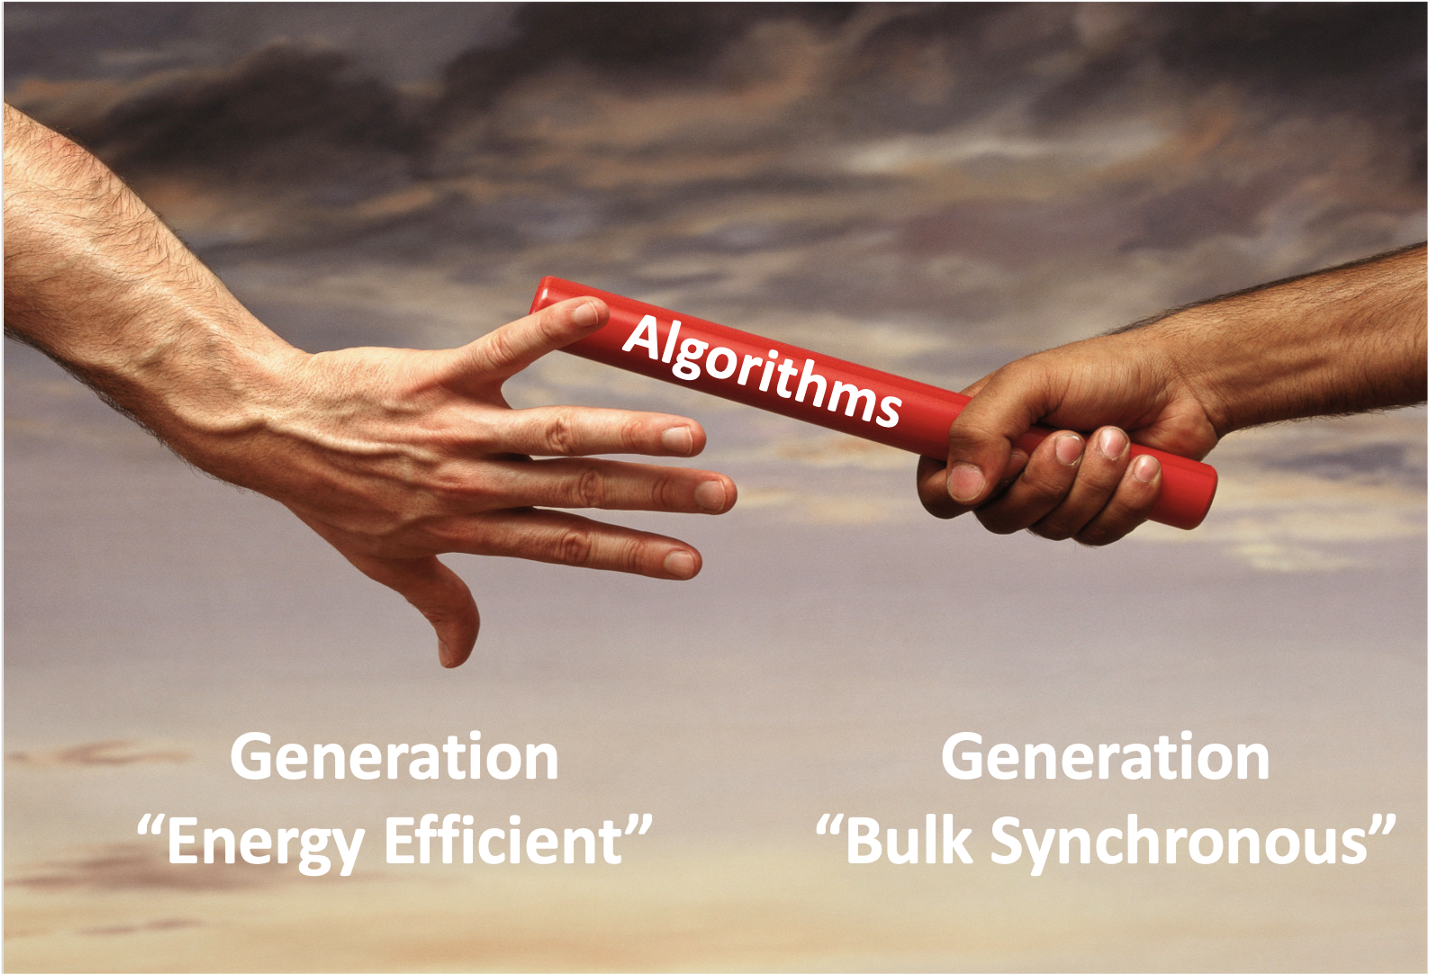 Generation change: from bulk synchronous to energy efficient computations